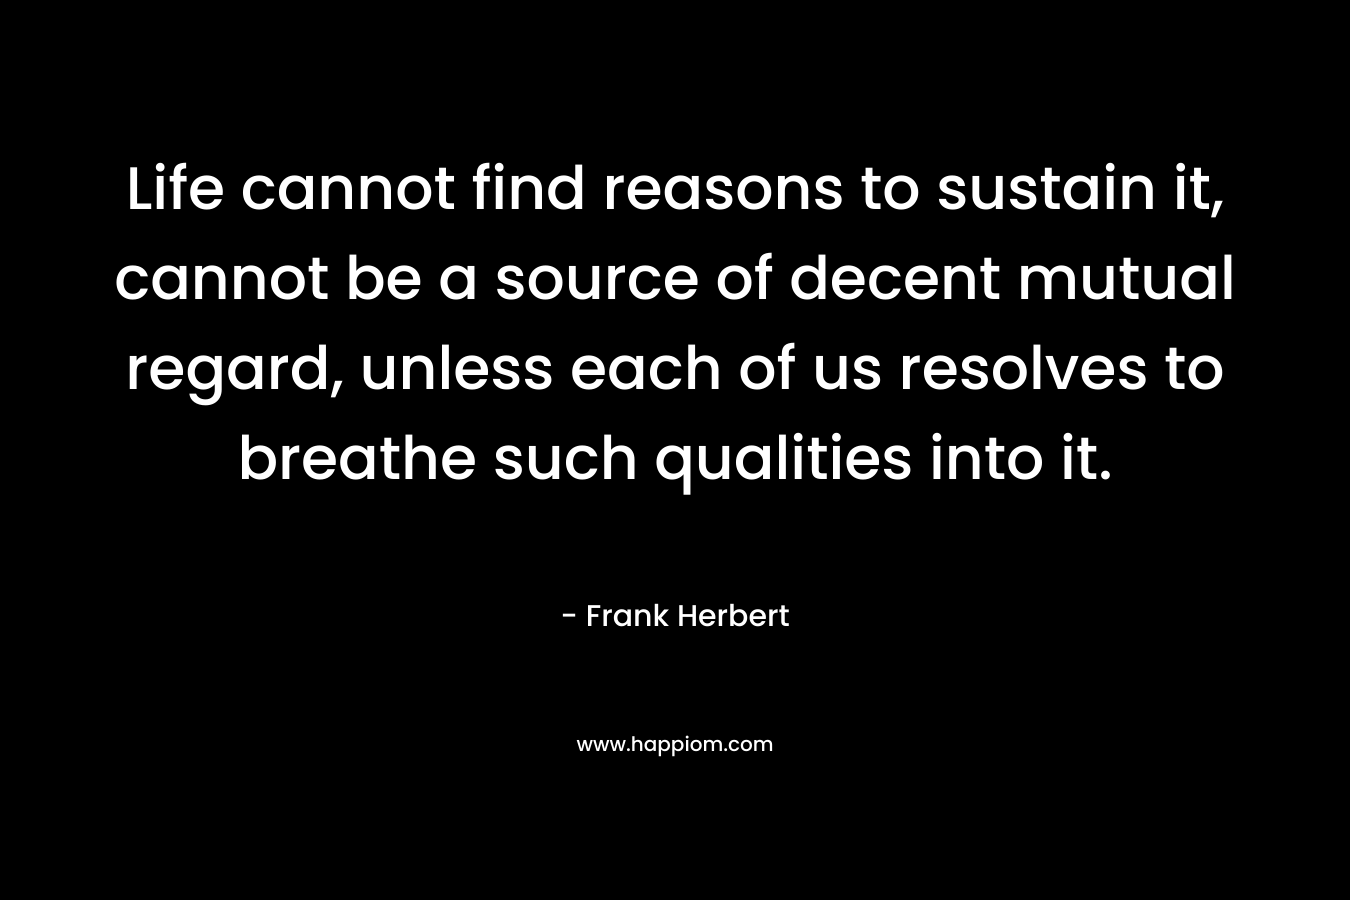 Life cannot find reasons to sustain it, cannot be a source of decent mutual regard, unless each of us resolves to breathe such qualities into it.